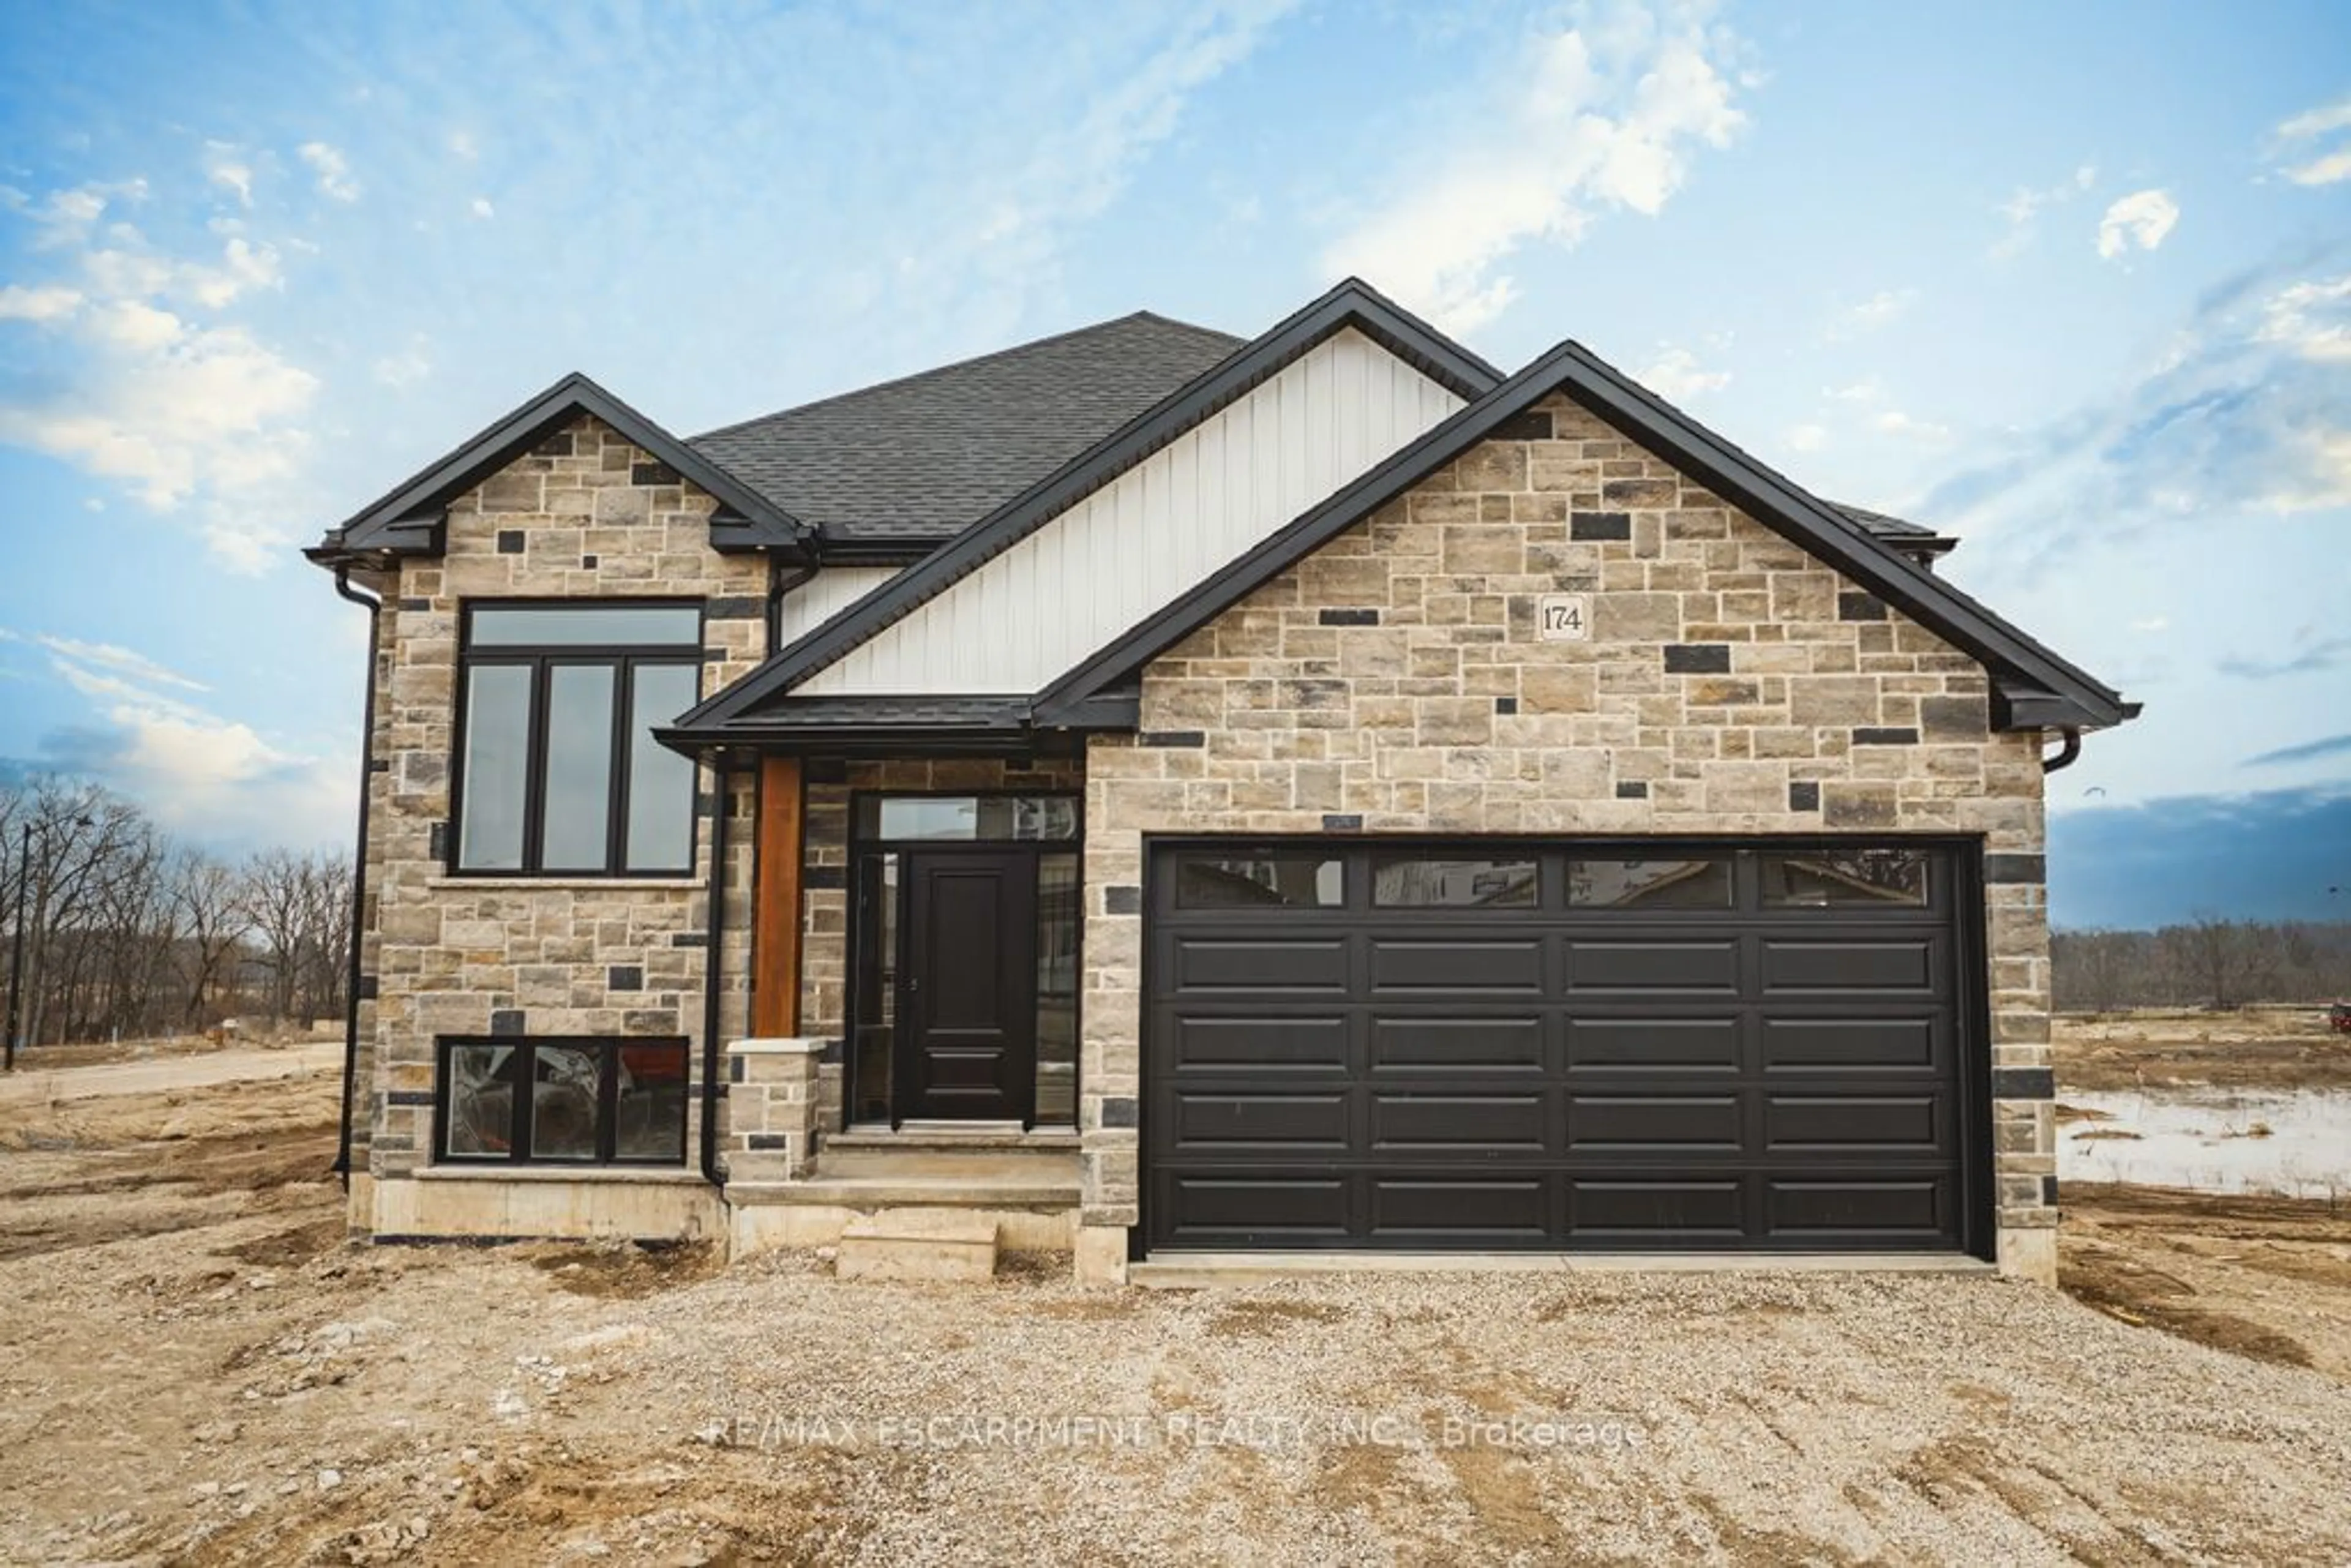 Home with brick exterior material for 174 Pike Creek Dr, Haldimand Ontario N0A 1E0